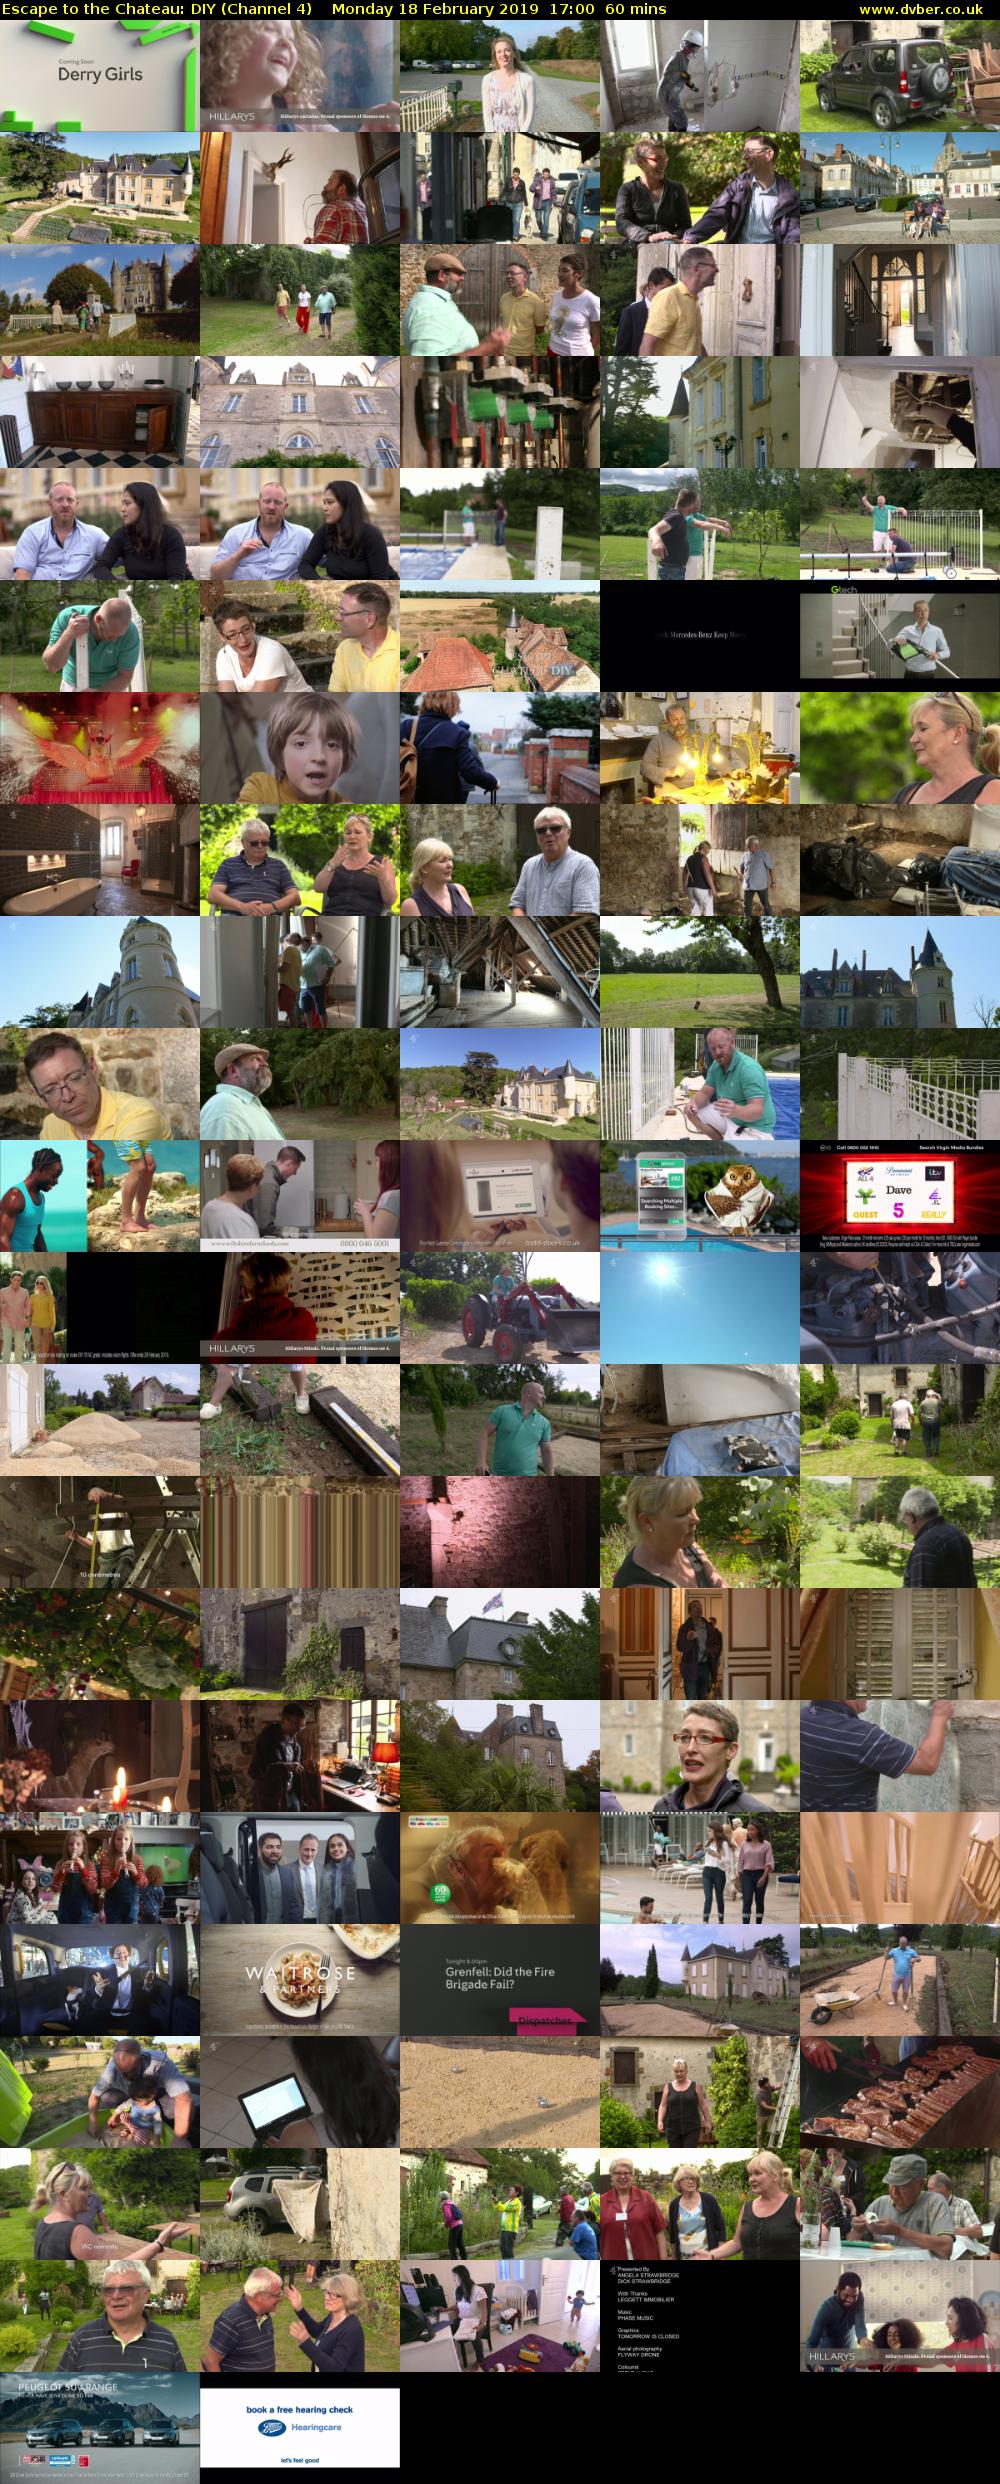 Escape to the Chateau: DIY (Channel 4) Monday 18 February 2019 17:00 - 18:00